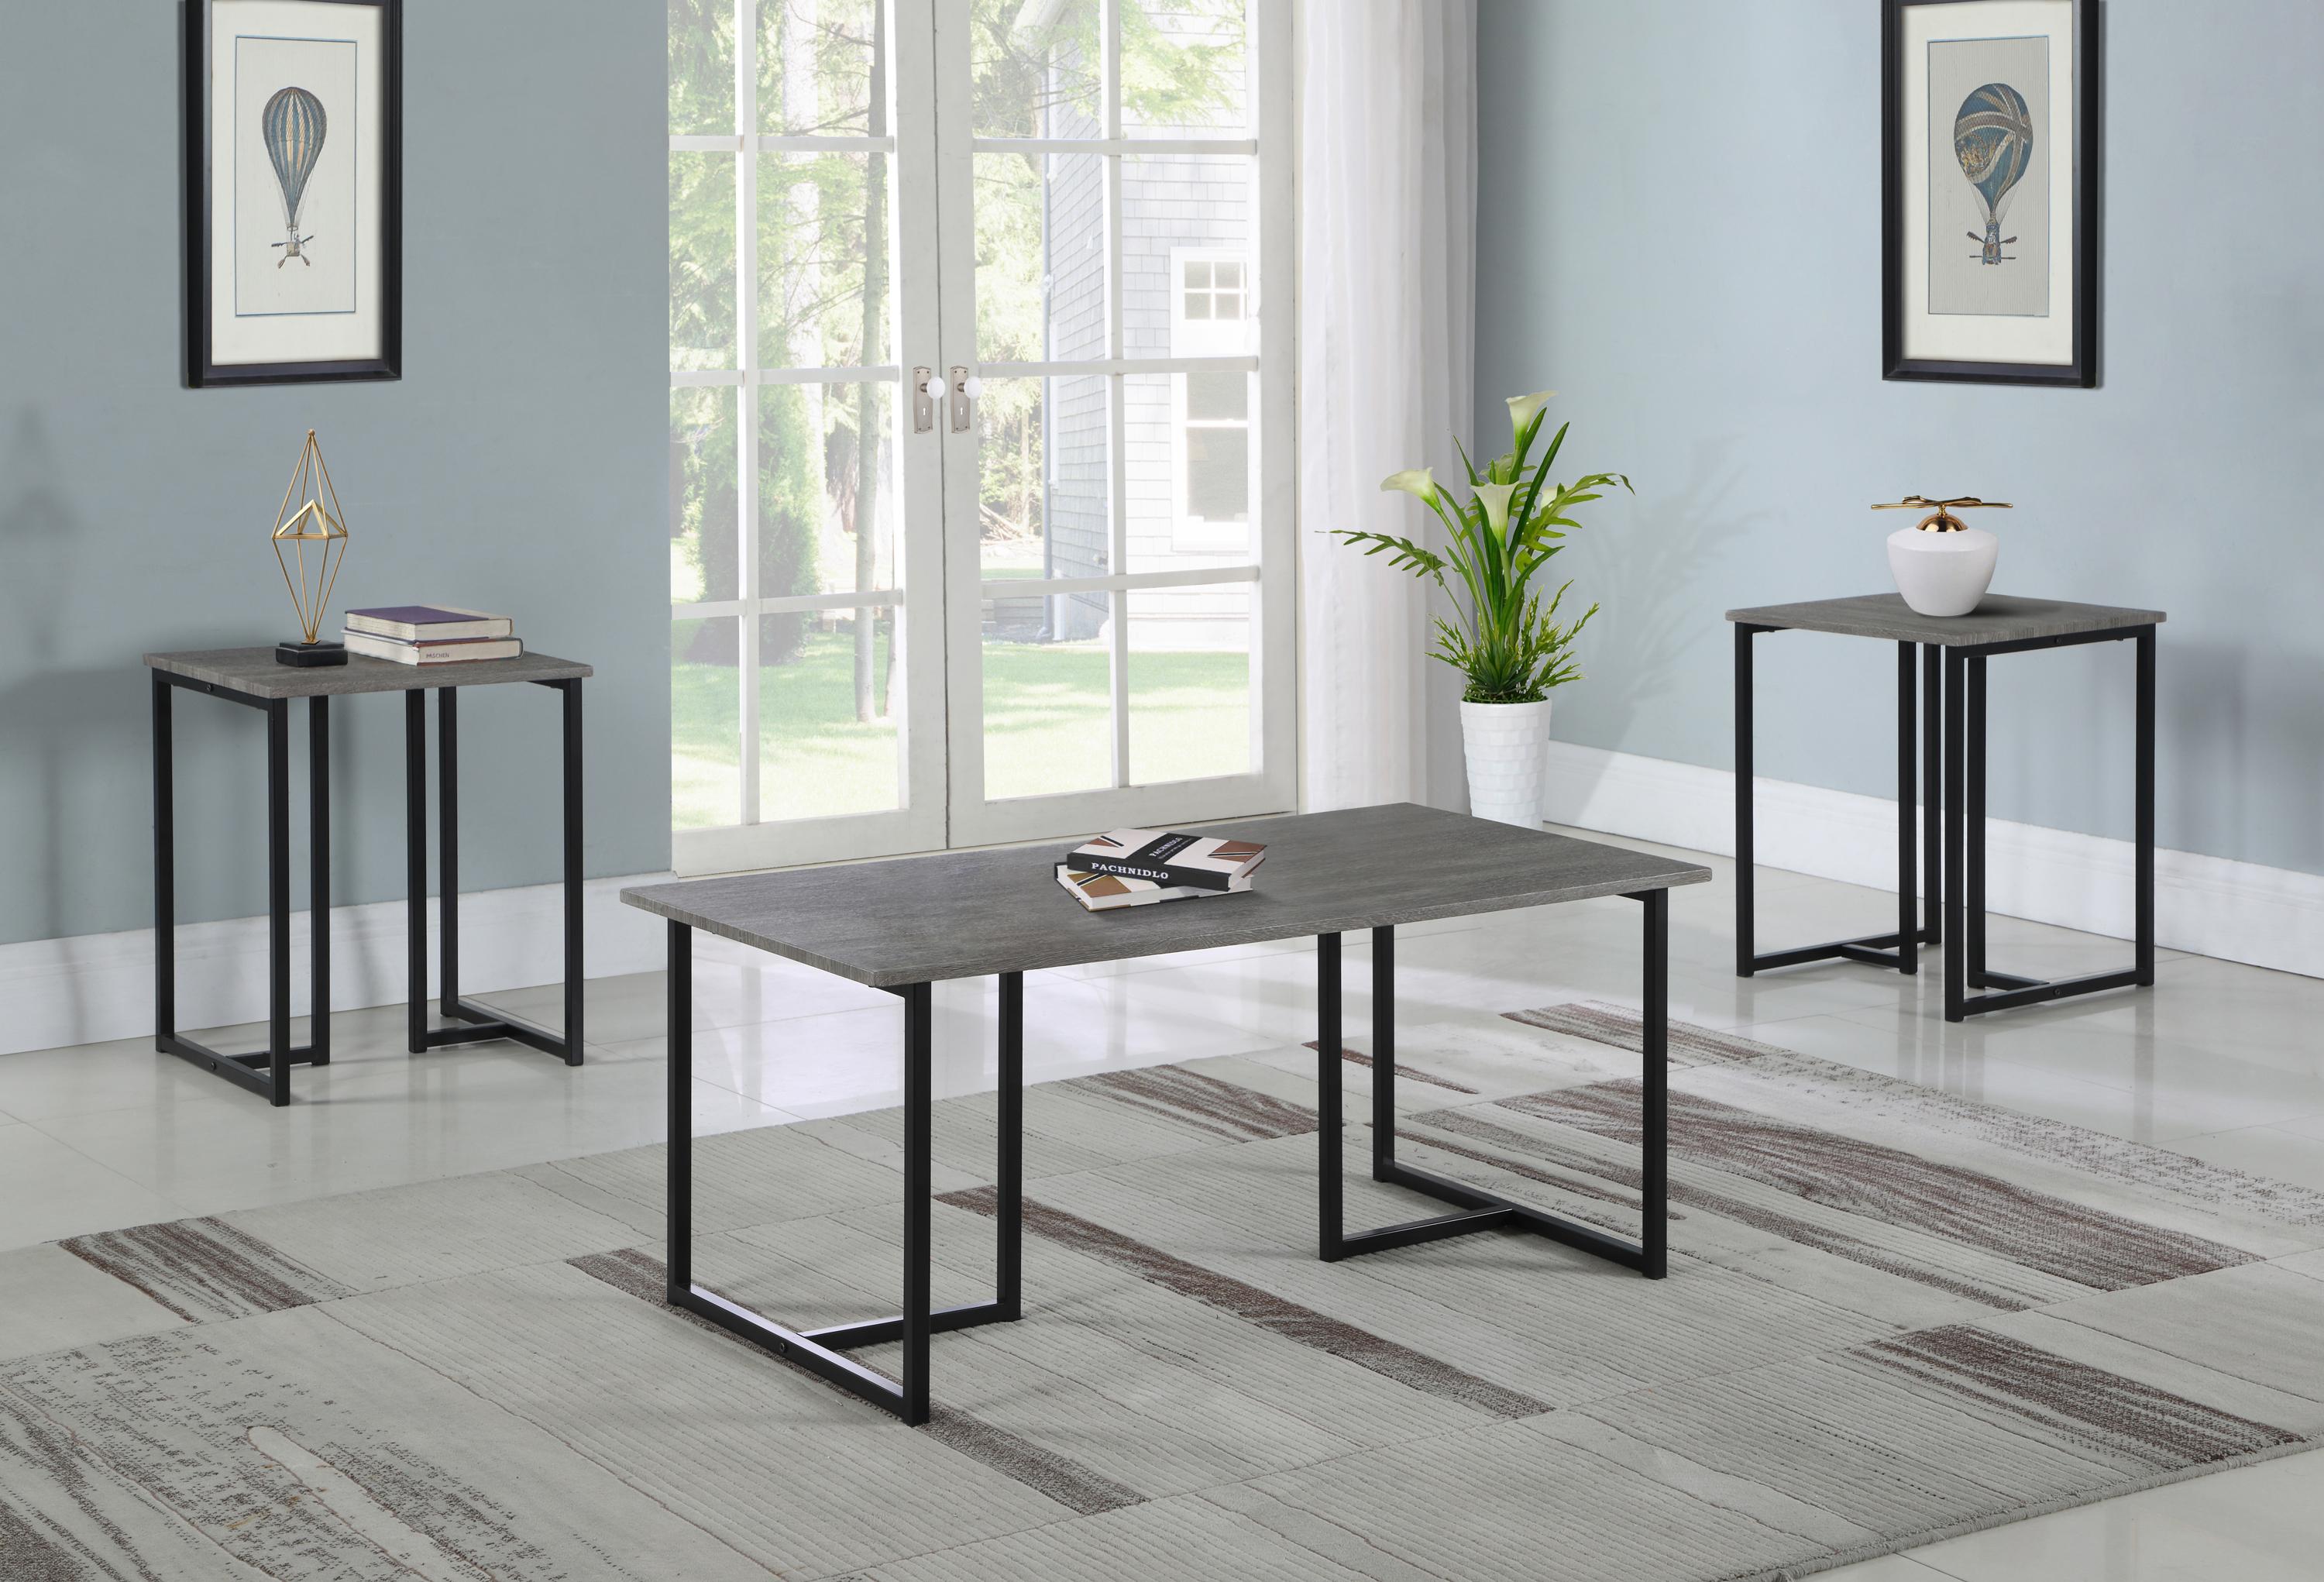 Transitional Coffee Table Set 753390 753390 in Gray 